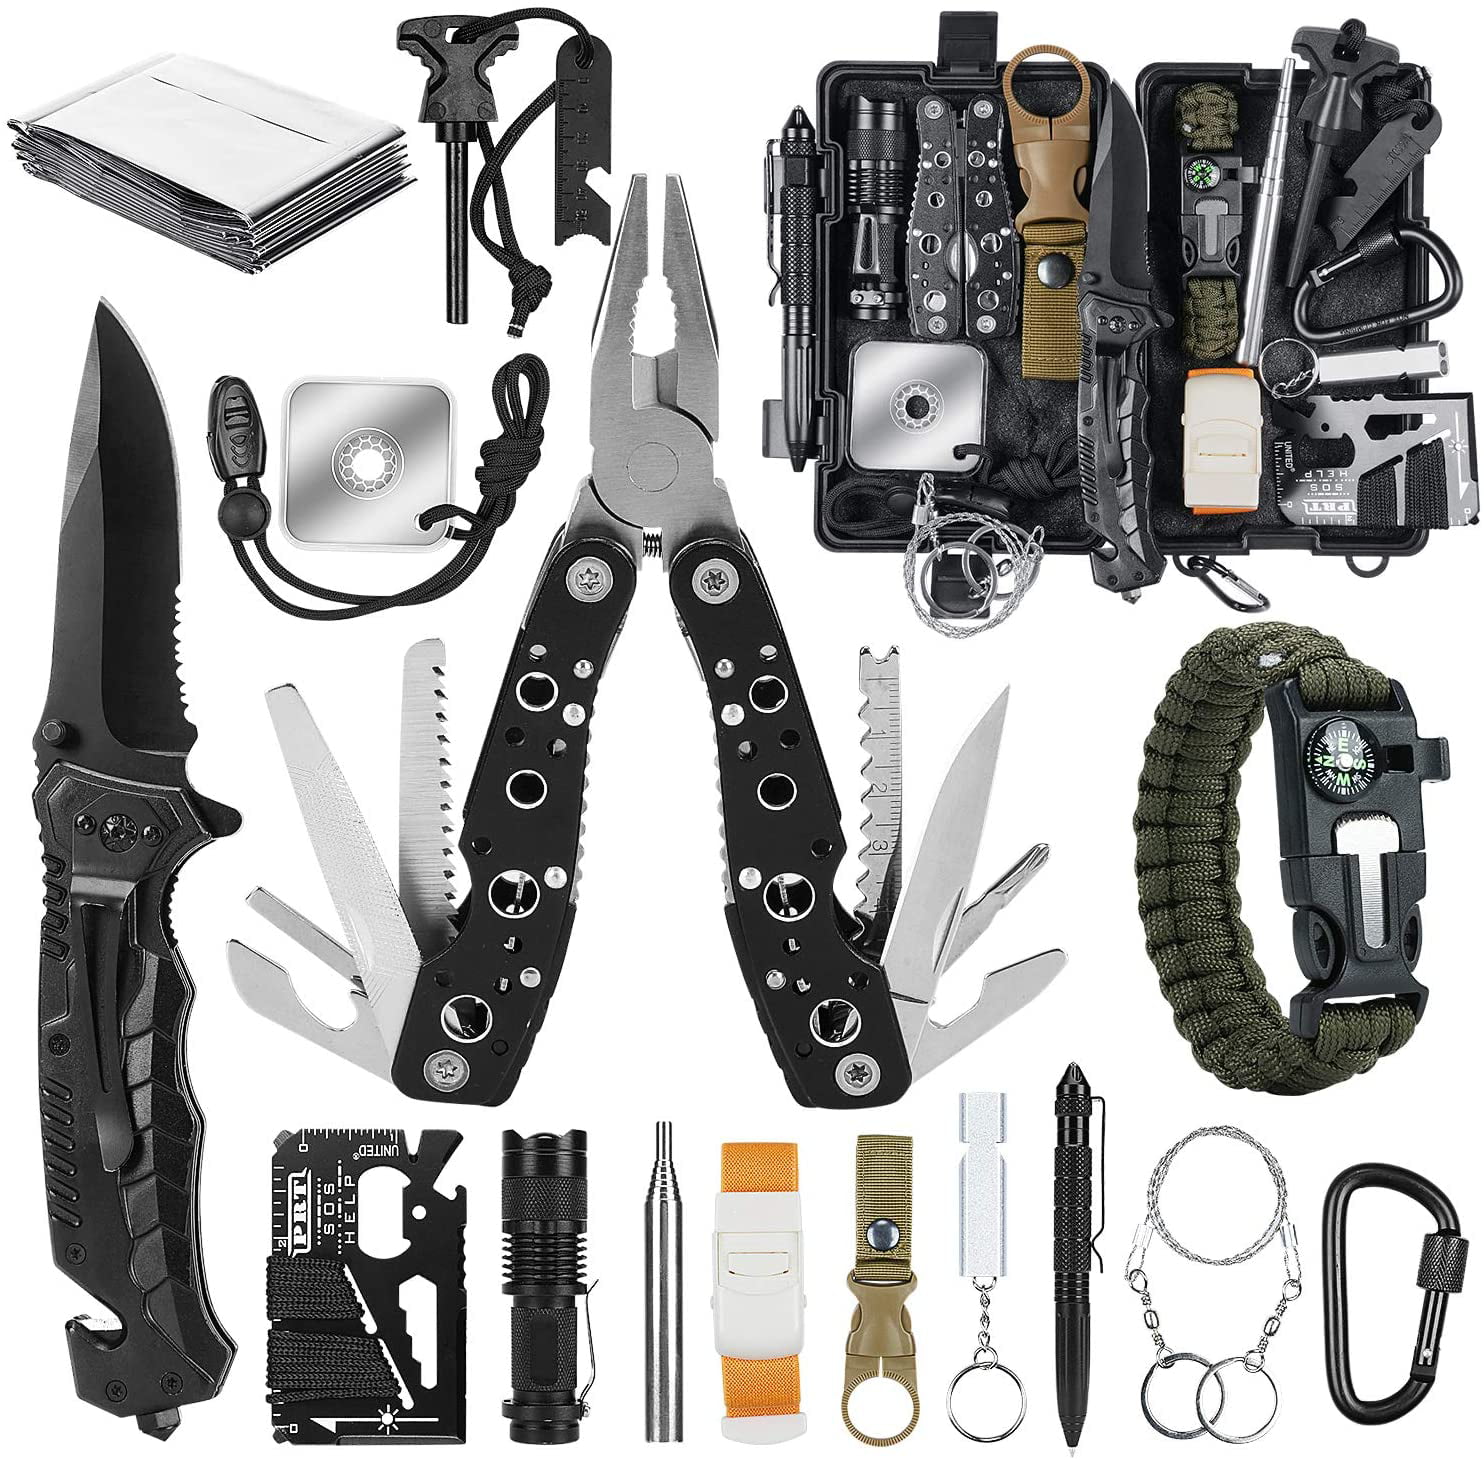 Gifts for Men Dad Husband Teenage Boy Survival Kits 25 in 1 Survival Gear and Equipment Supplies Kits Christmas Stocking Stuffers Cool Gadgets Gifts for Families Outdoors Camping Hiking Adventures 